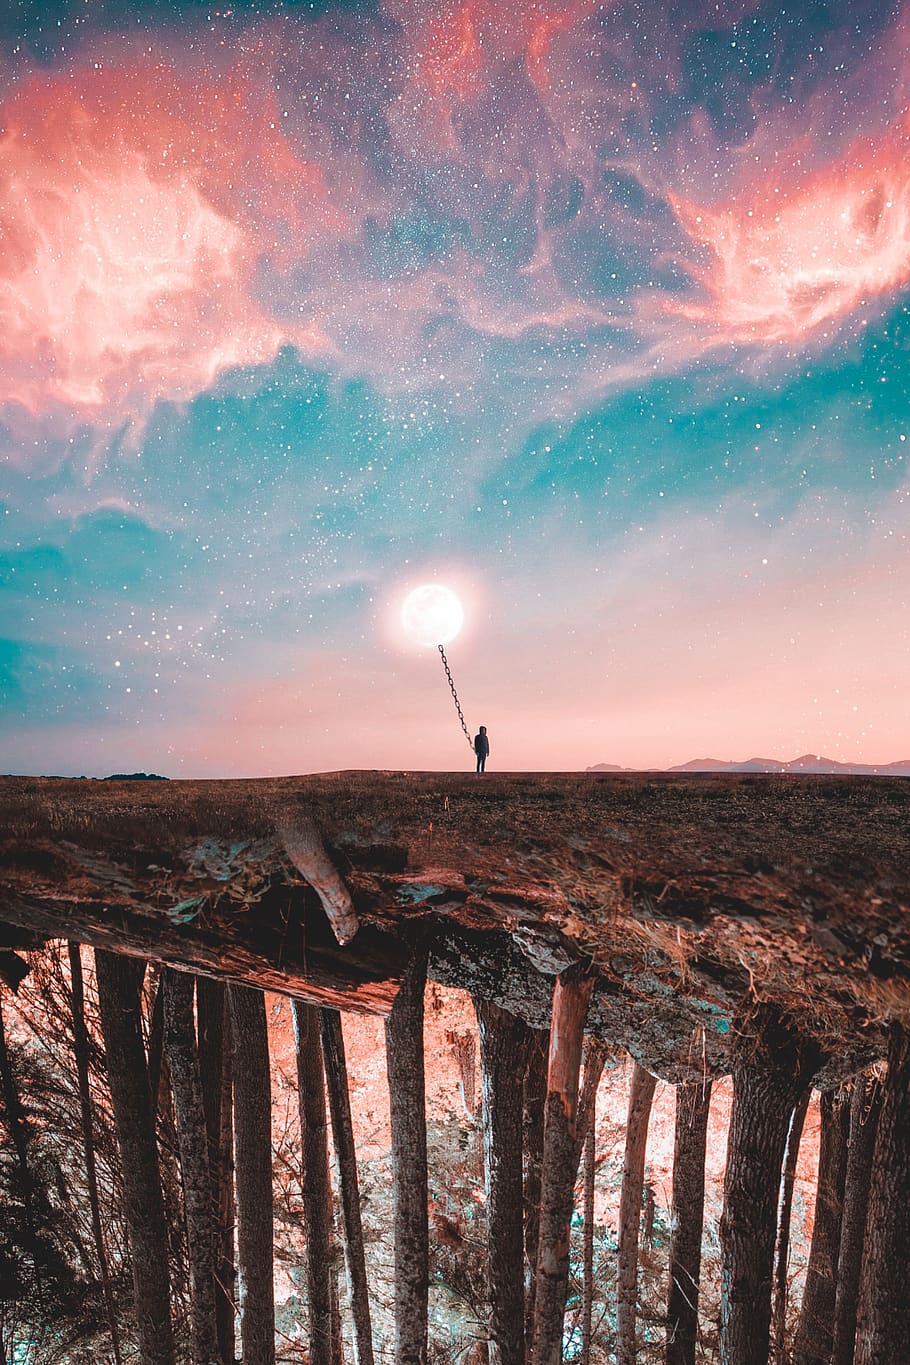 boy moon, ball, sky, cosmos, fantasy, photoshop, forest, surrealism, cloud - sky, nature